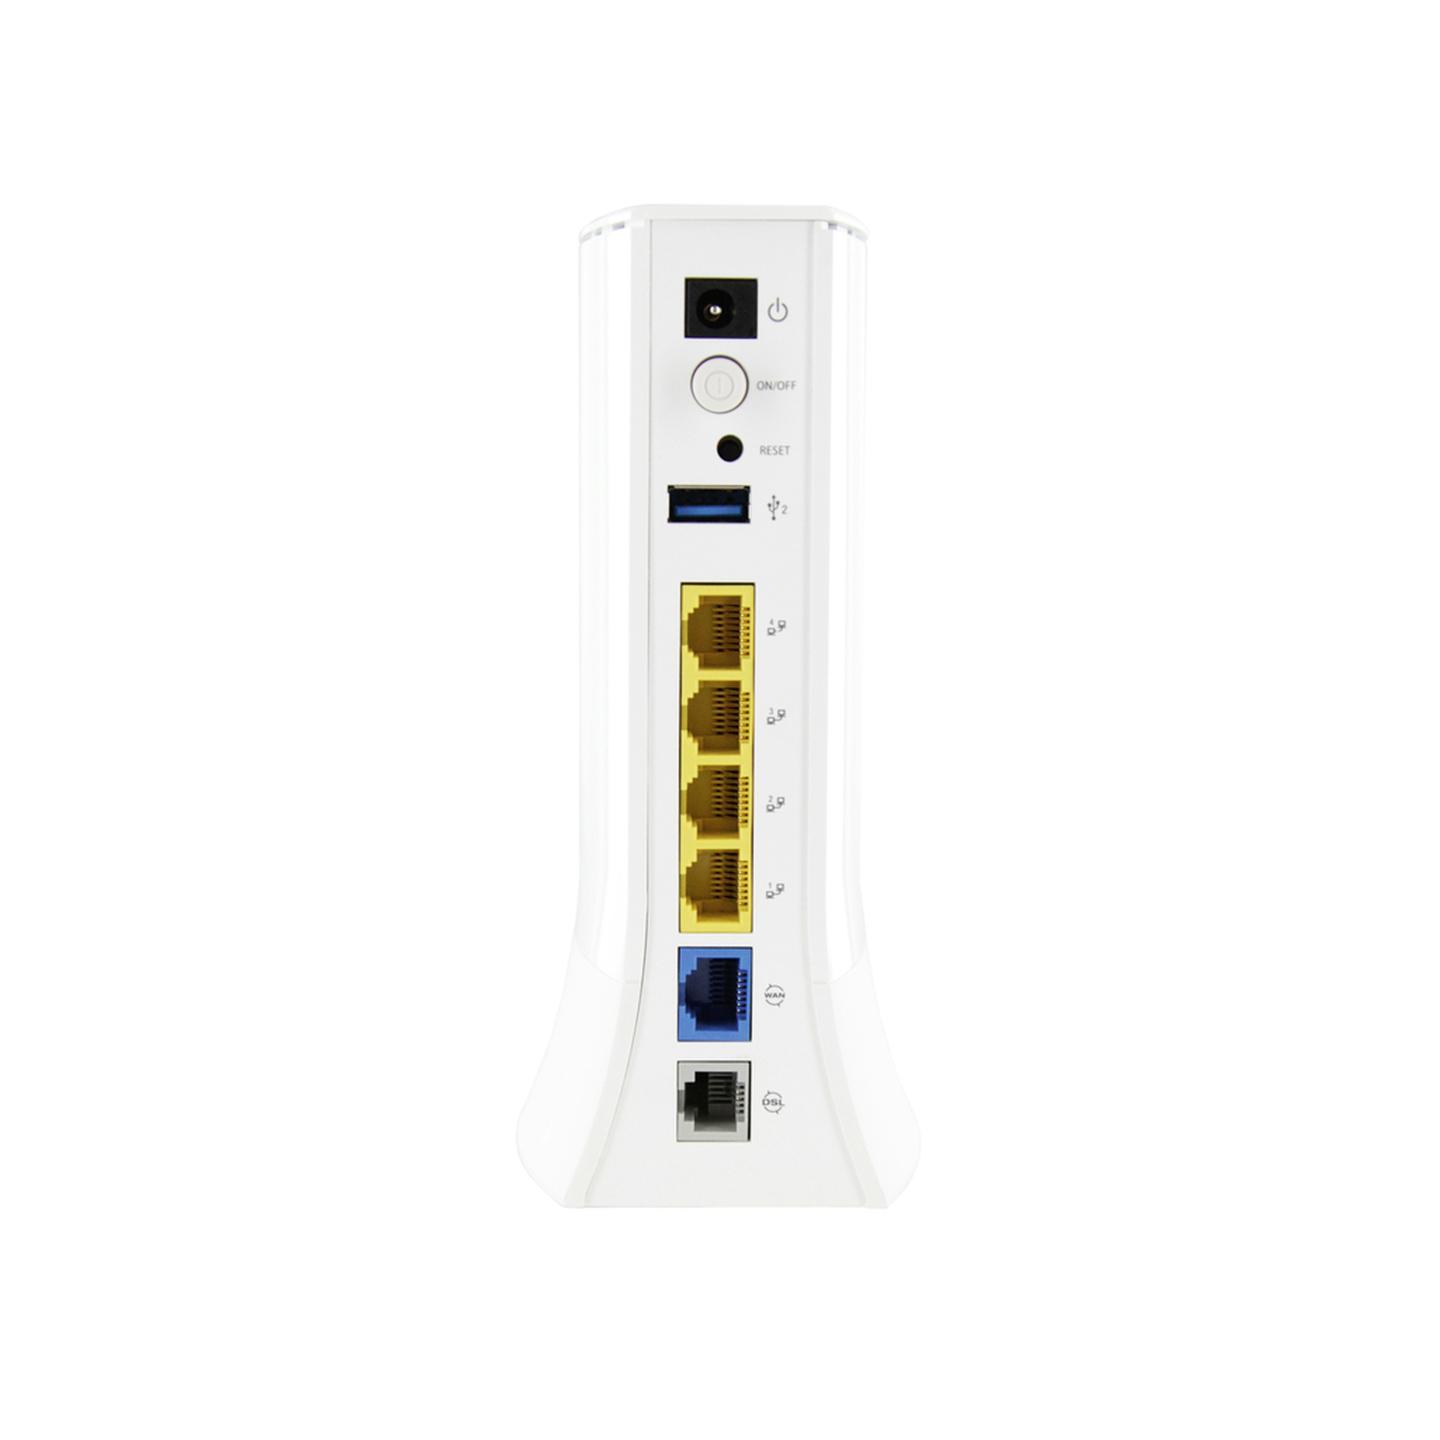 N300 Wi-Fi VDSL/ADSL Modem Router with USB Sharing